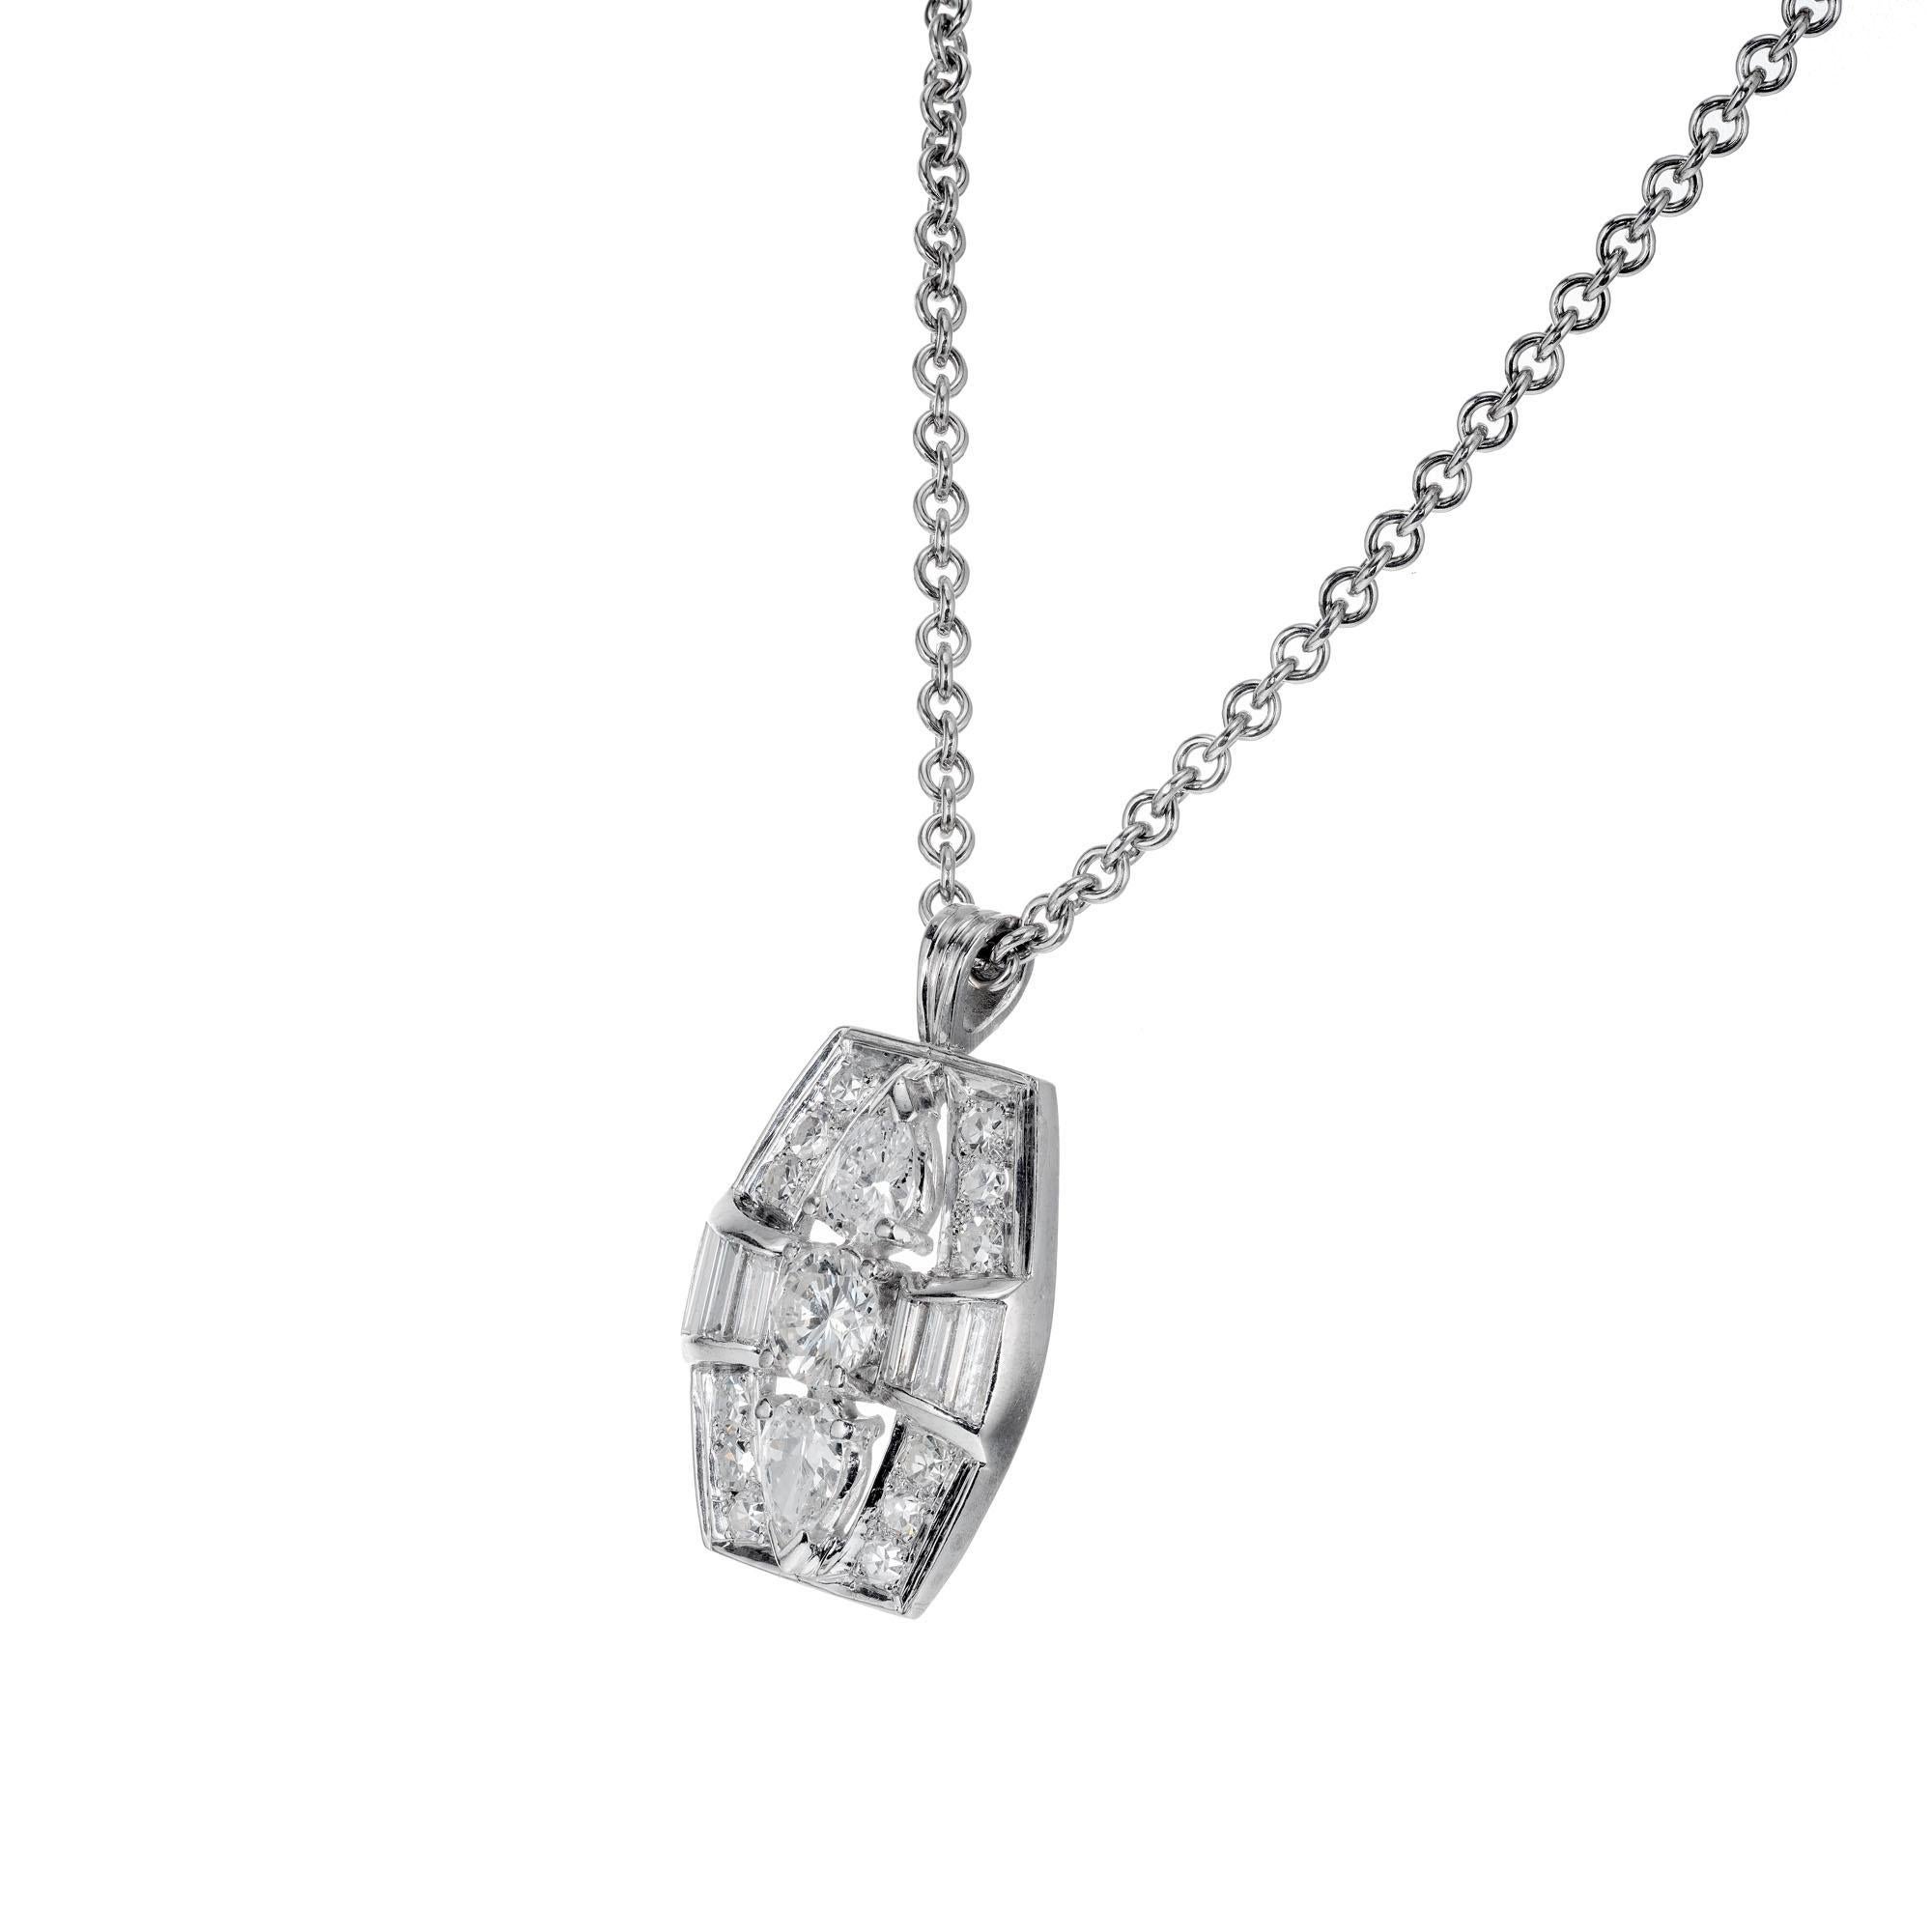 Retro style 1960’s diamond platinum pendant necklace with round, pear and baguette cut diamonds. Platinum cable link chain.

1 round brilliant cut diamond F-G SI, approx. .35cts
2 pear shape diamonds G SI-I, approx. .40cts
6 step cut baguette